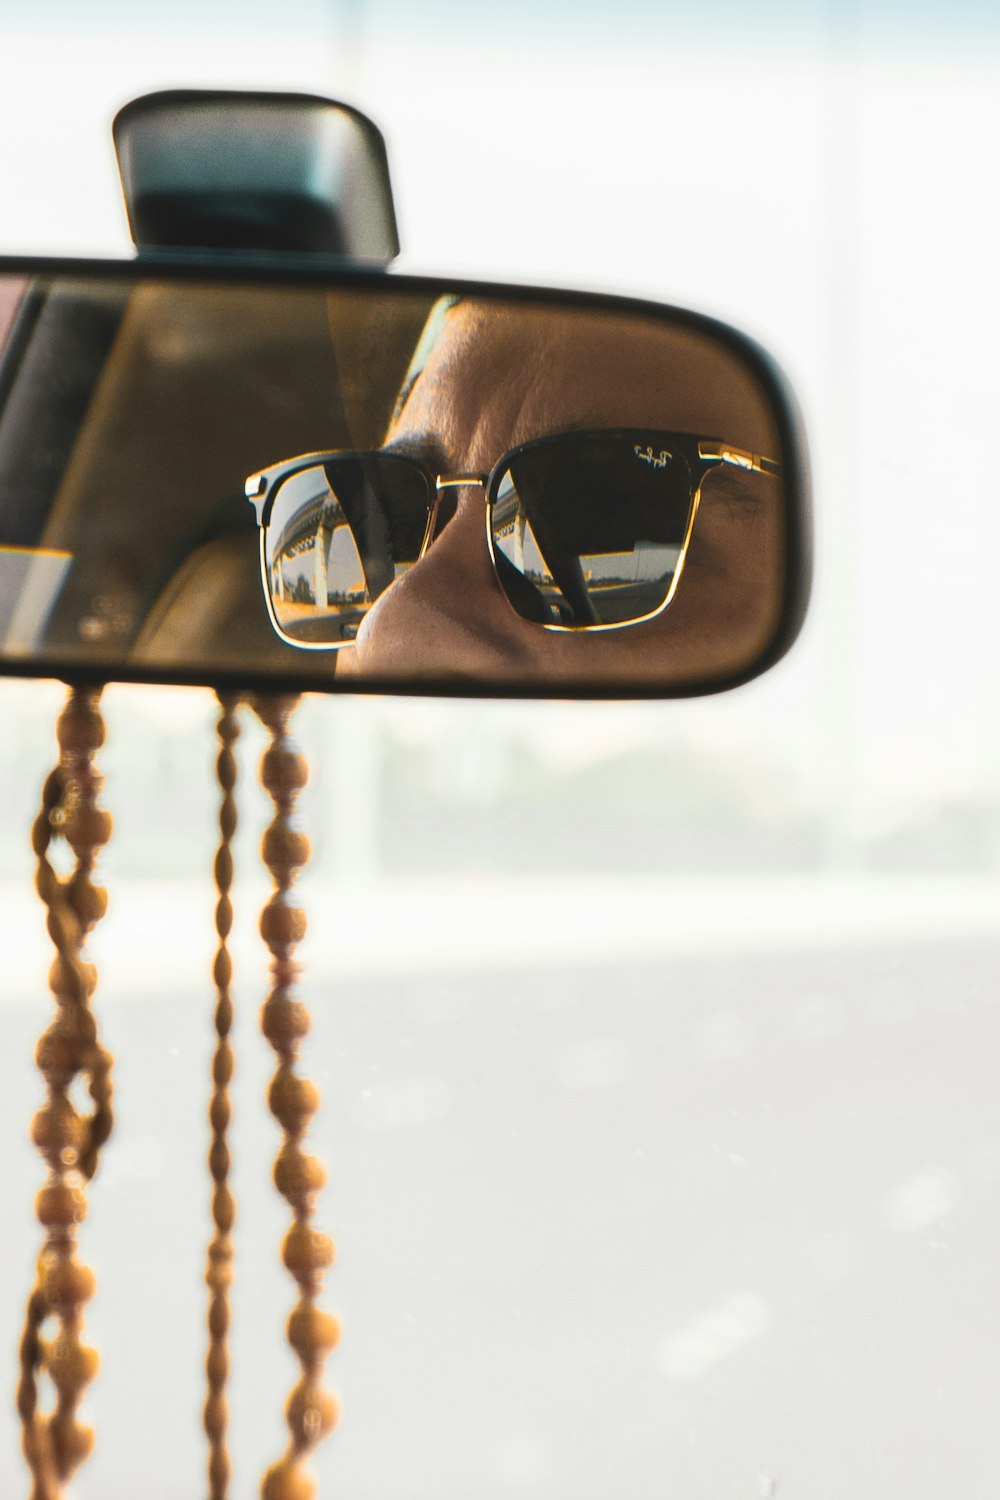 a man wearing sunglasses is reflected in a rear view mirror